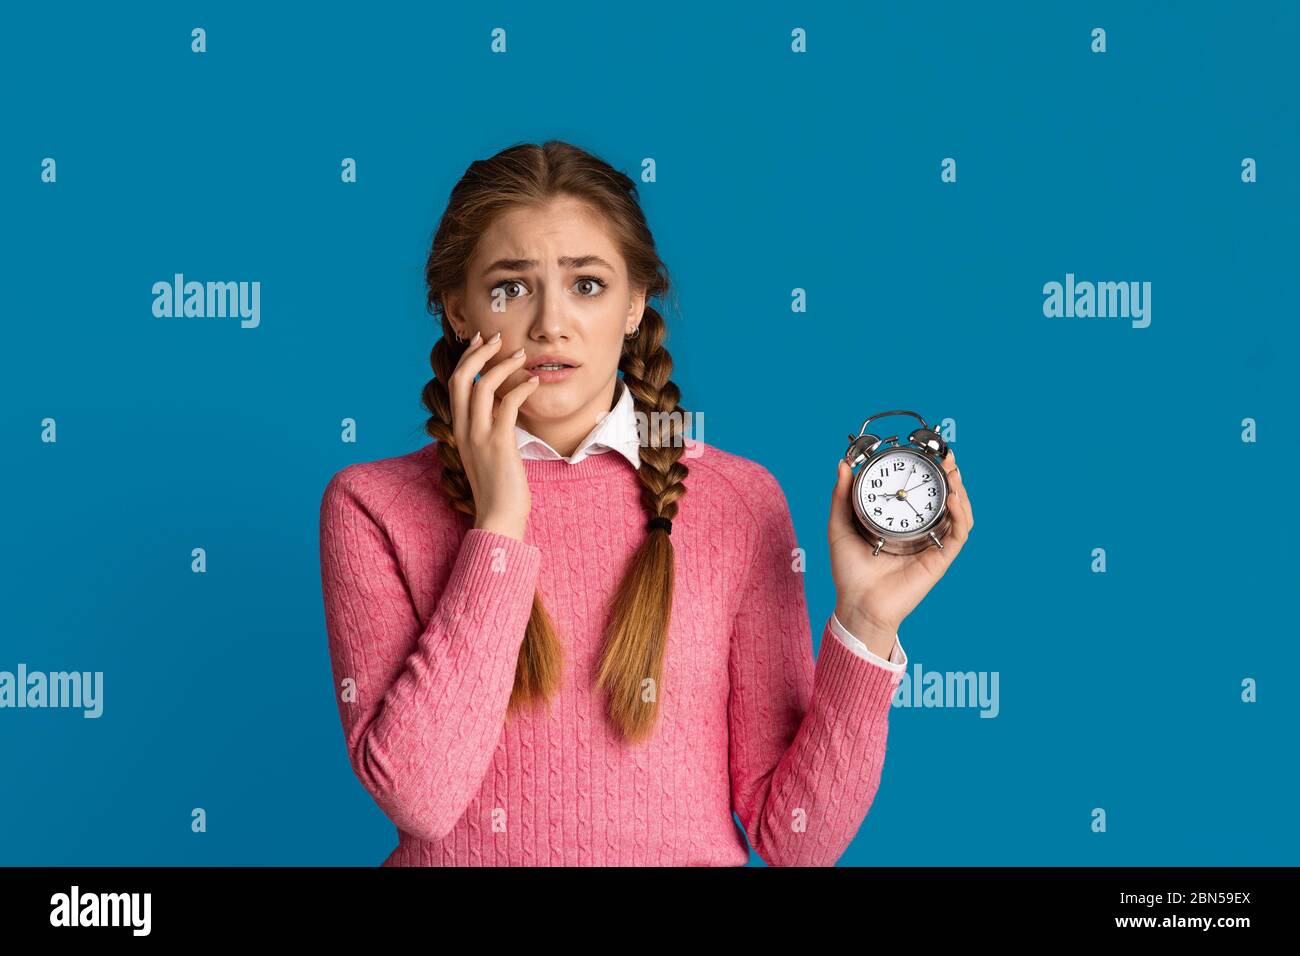 Shocked girl with alarm clock in hand Stock Photo